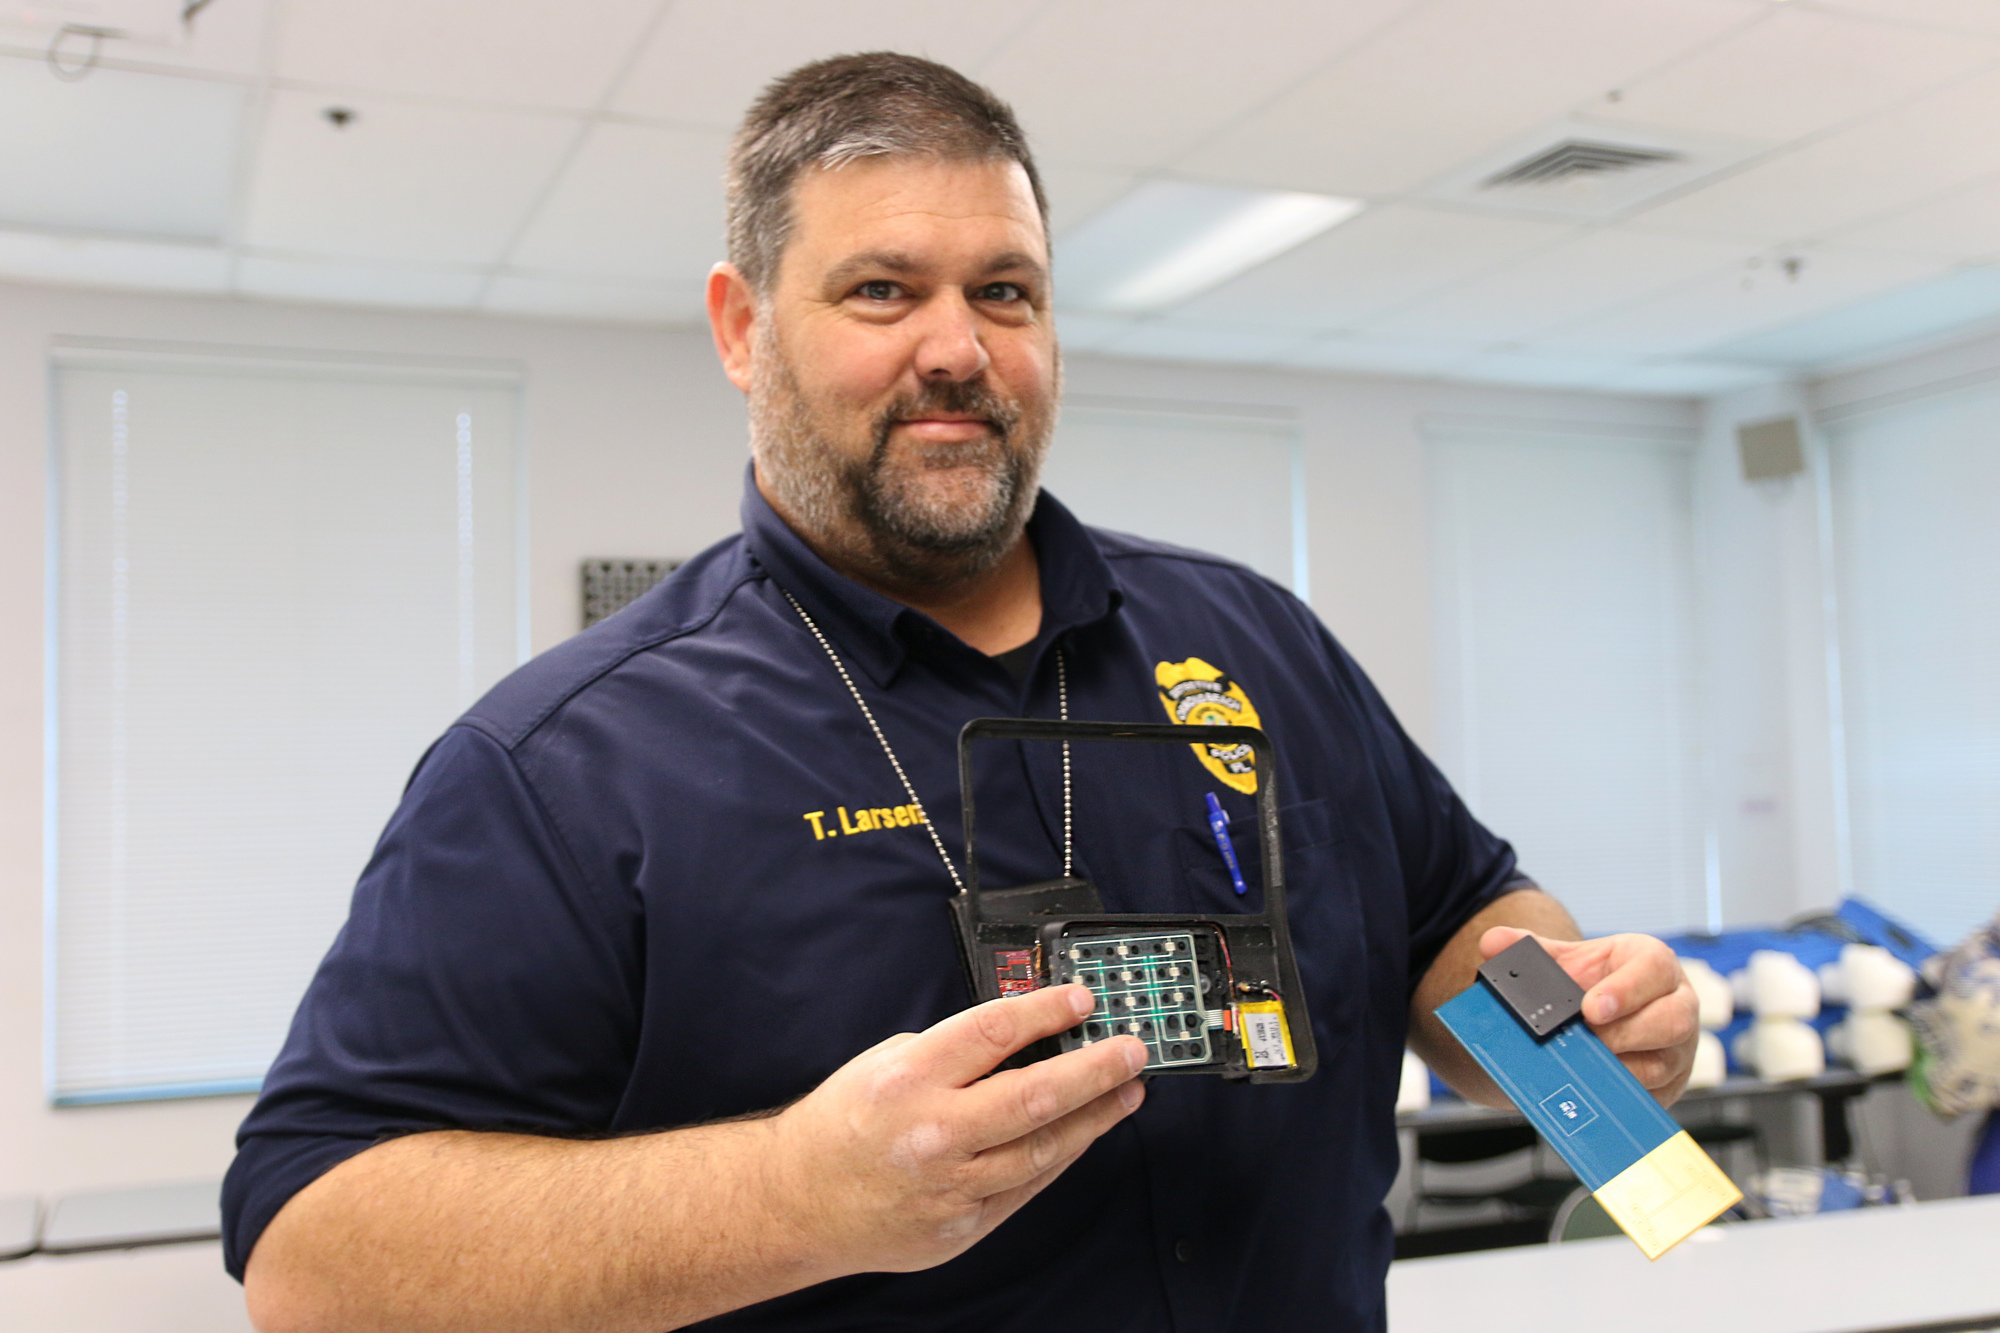 Sgt. Tom Larsen holds up an example of a skimmer removed from a local point of sale system along with the 